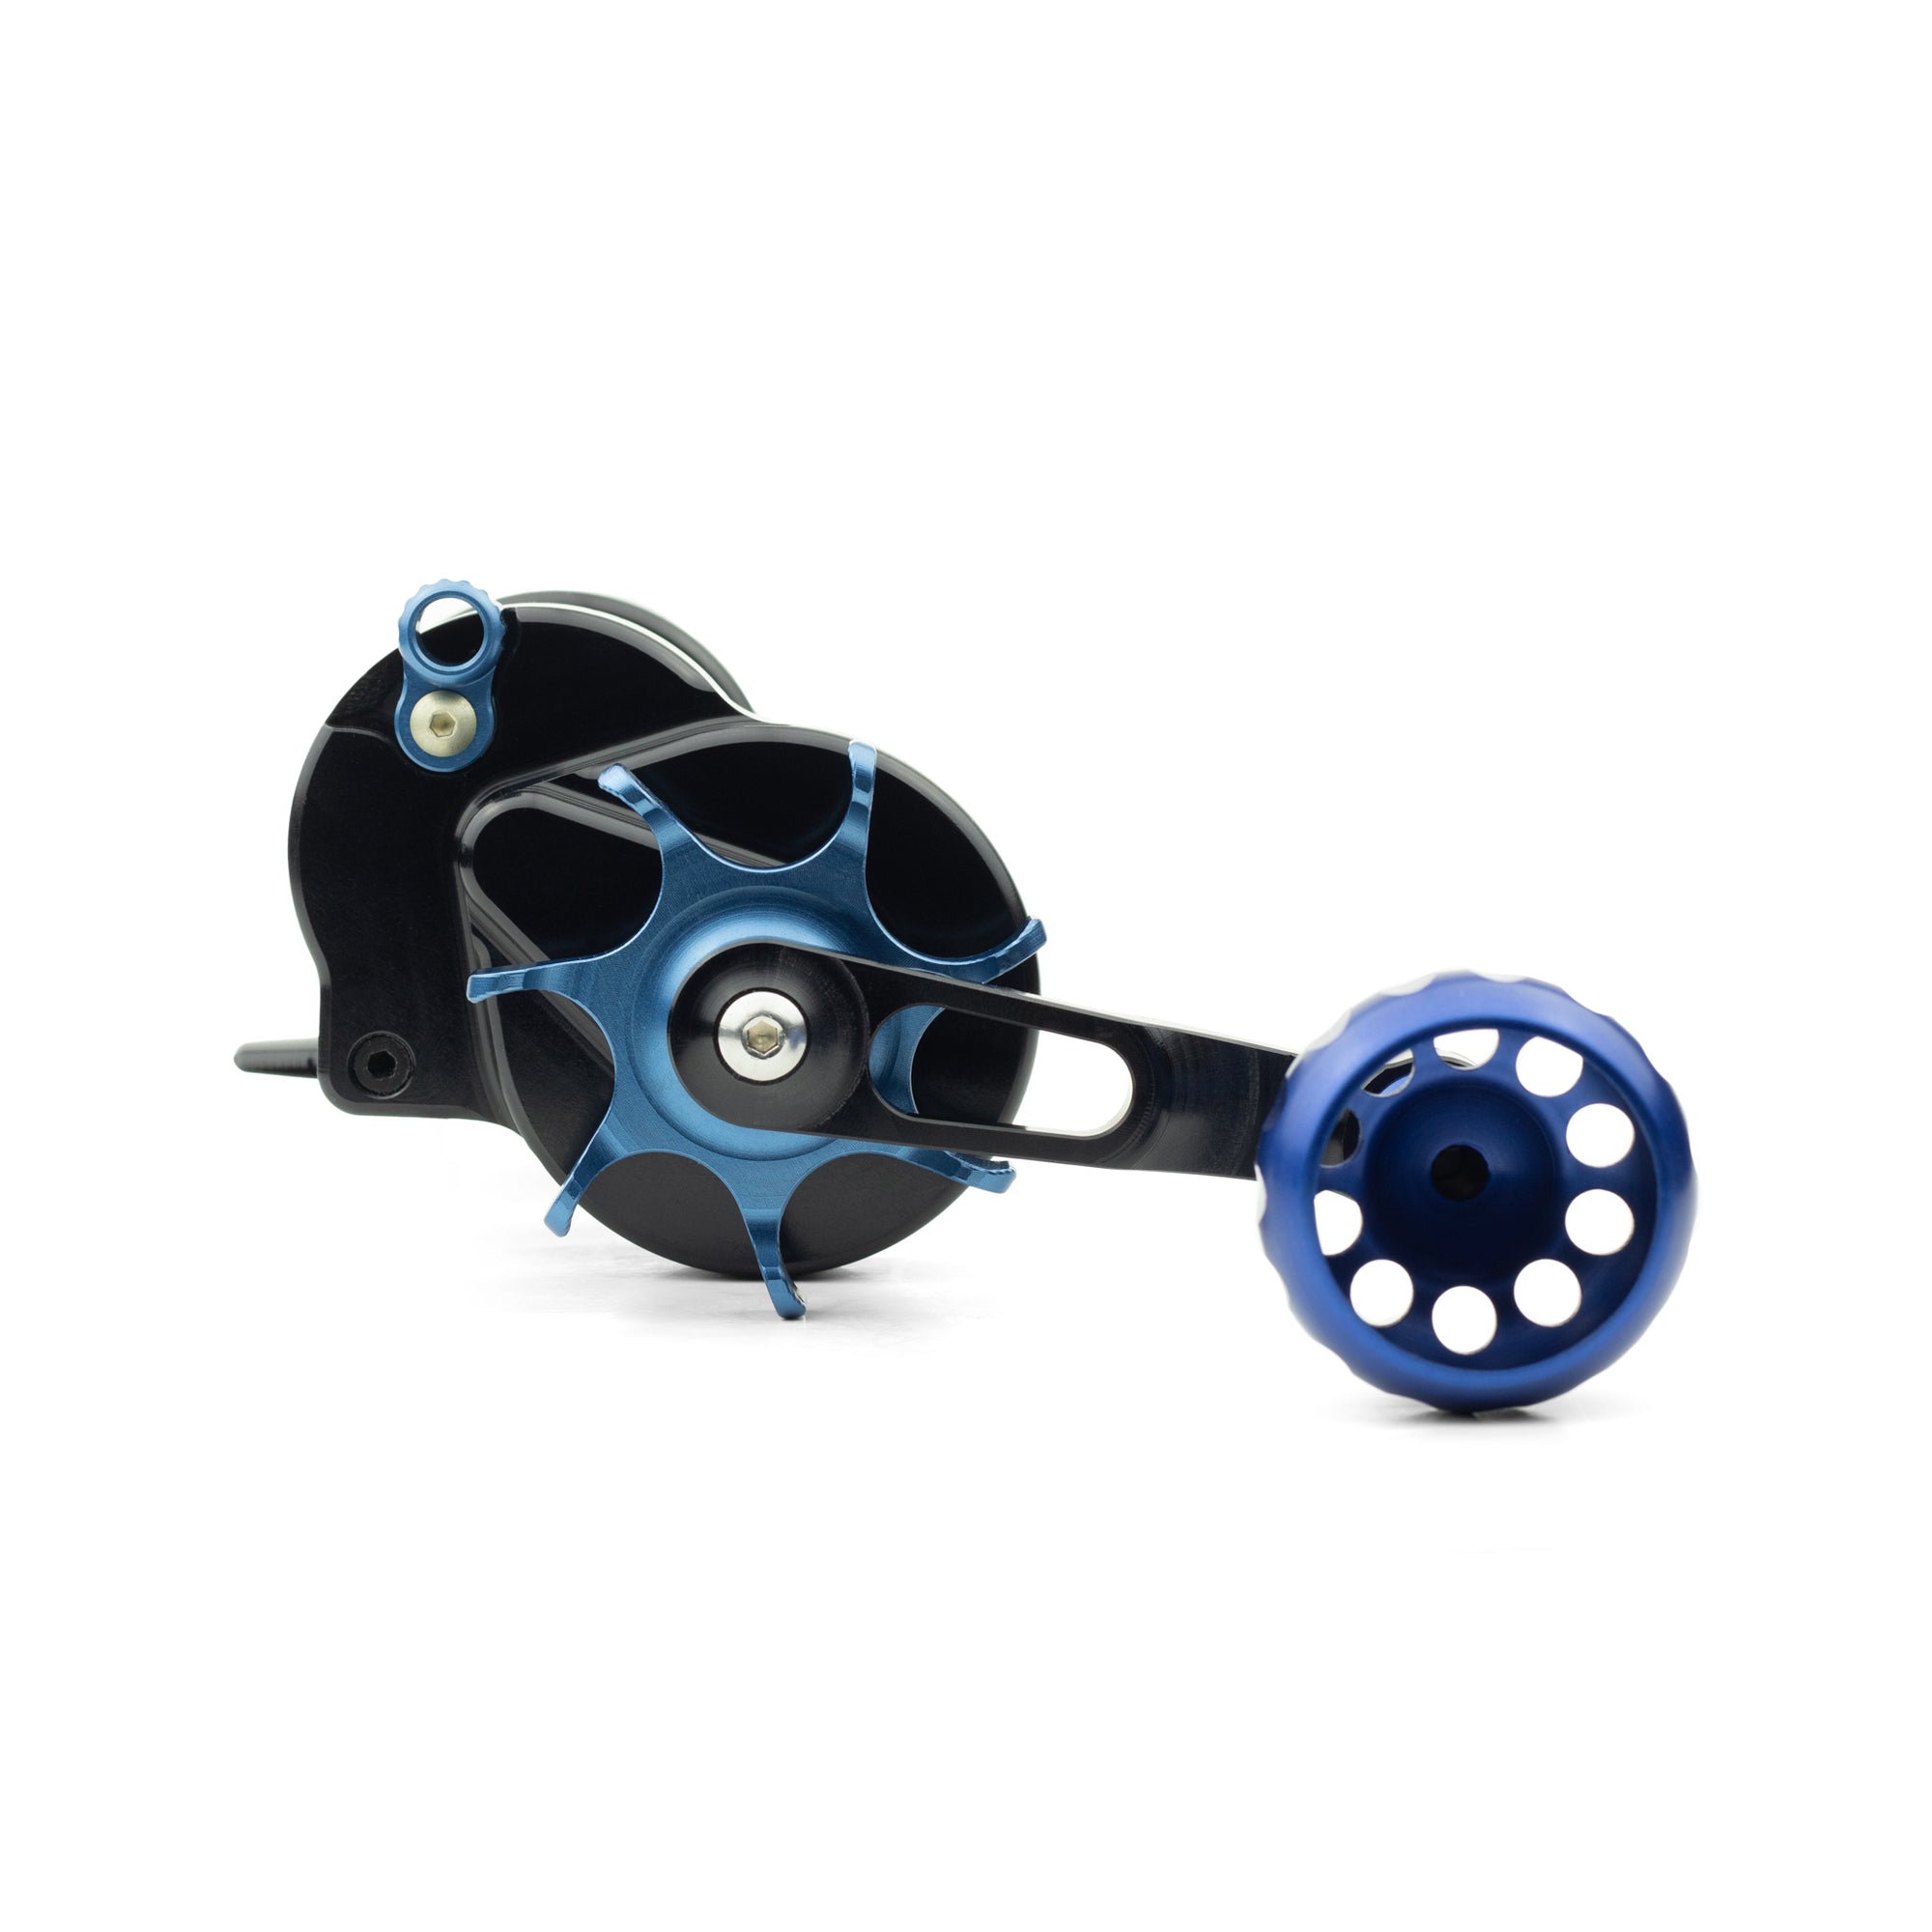 Seigler SF Small Fly Reel in Silver with Blue Accents